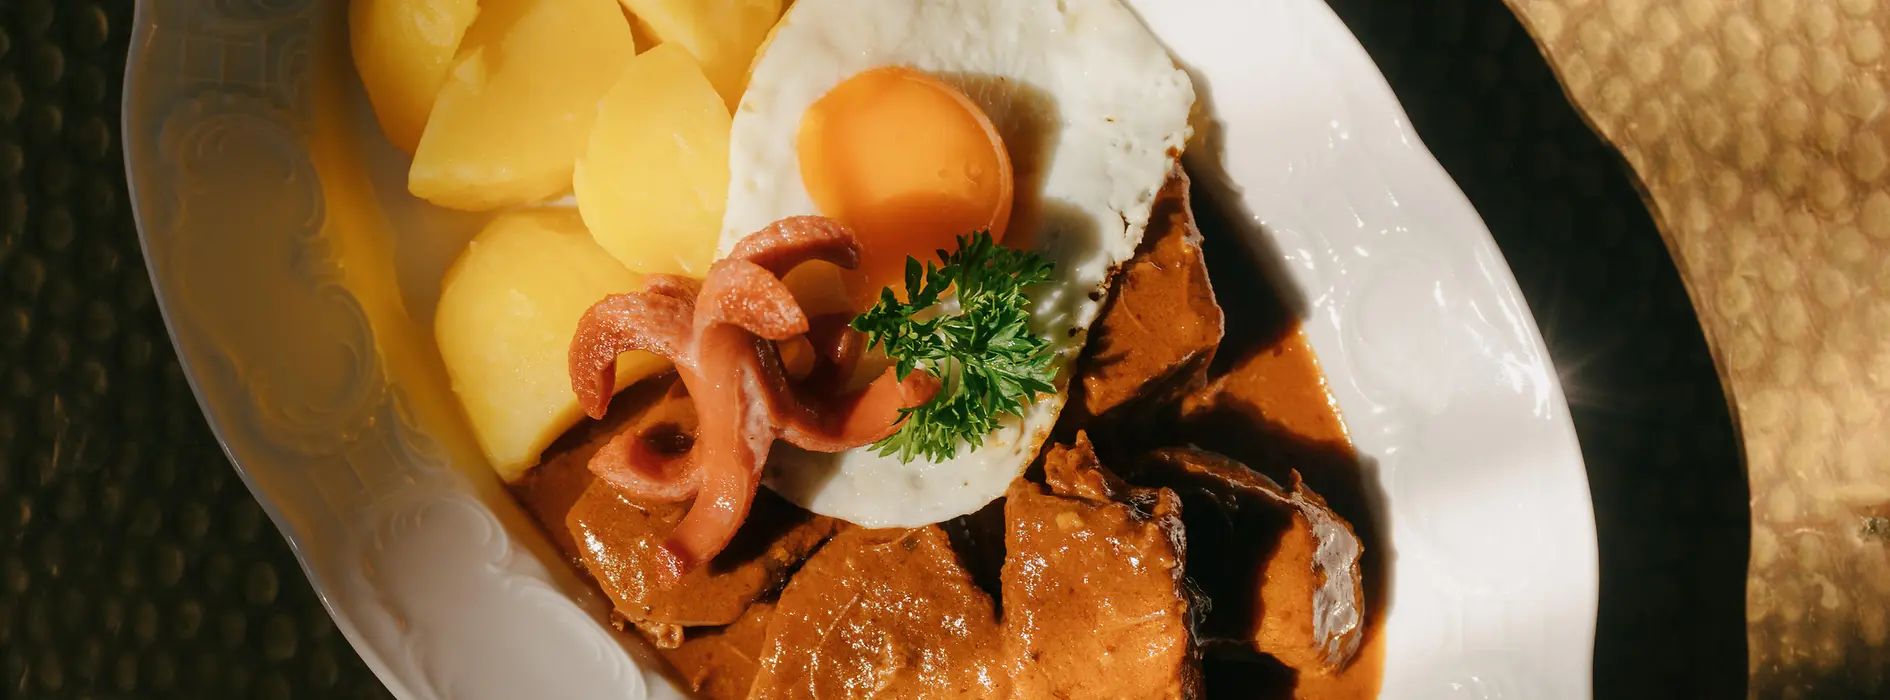 A plate of Fiakergulasch (goulasch) with boiled potatoes, fried egg, and a sausage